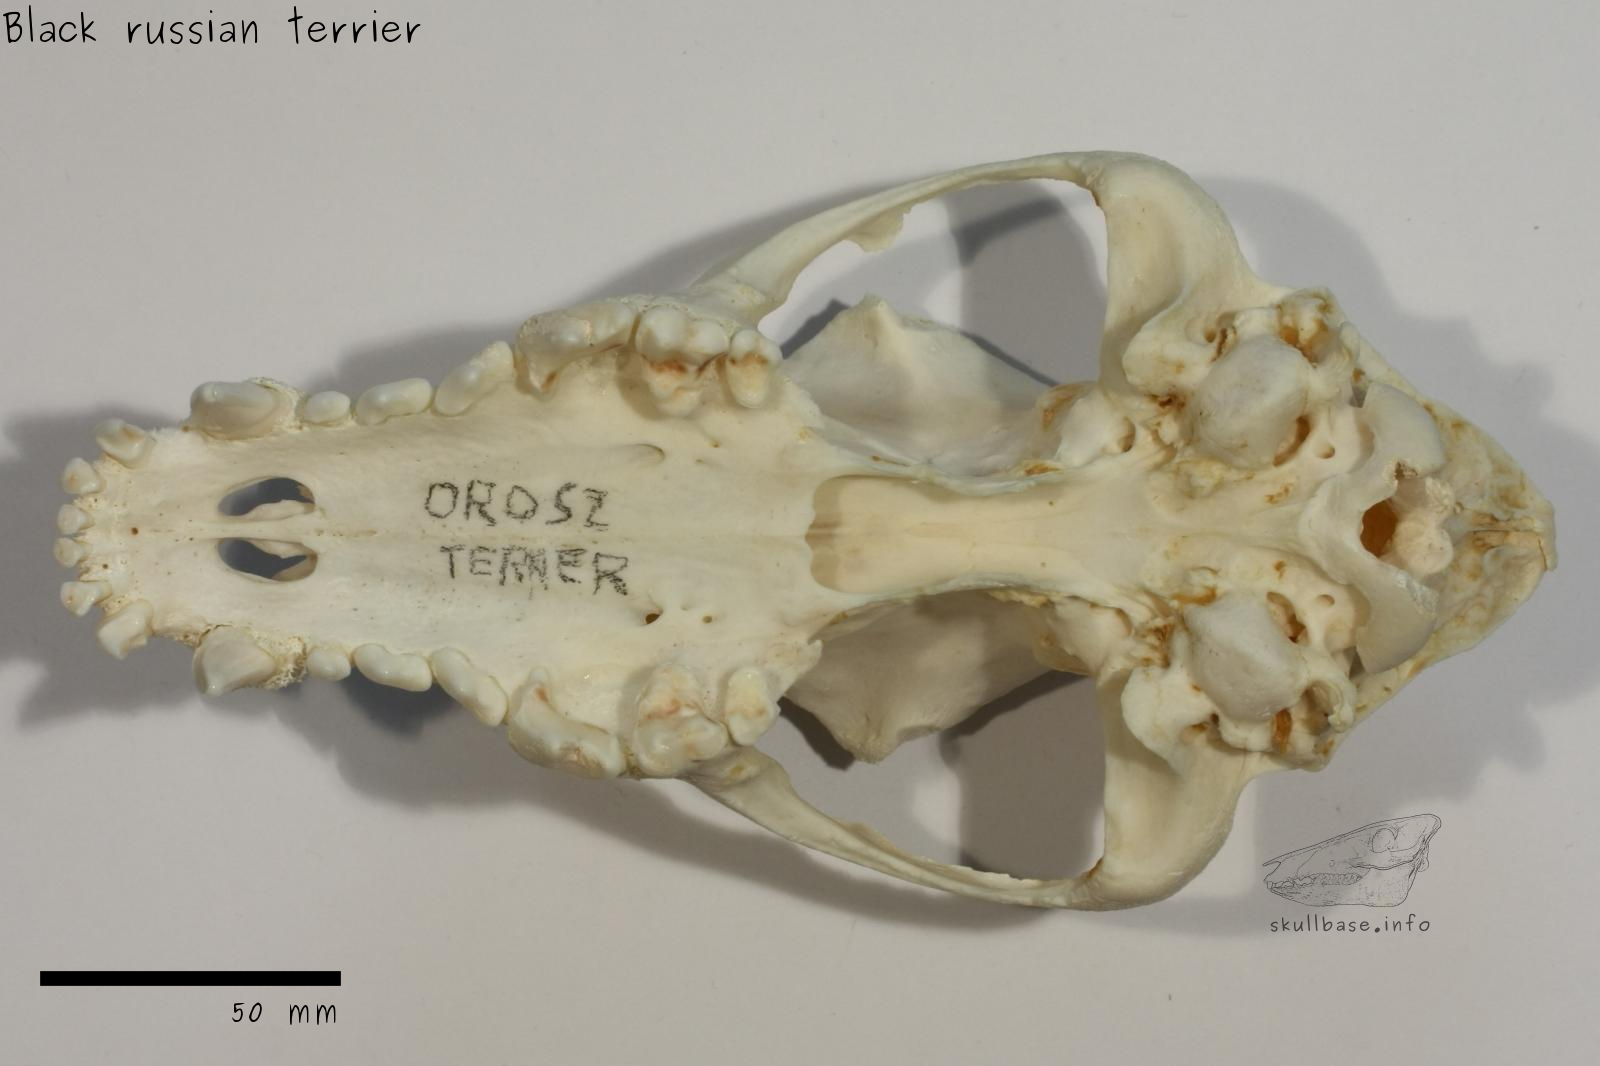 Black russian terrier (Canis lupus familiaris) skull ventral view